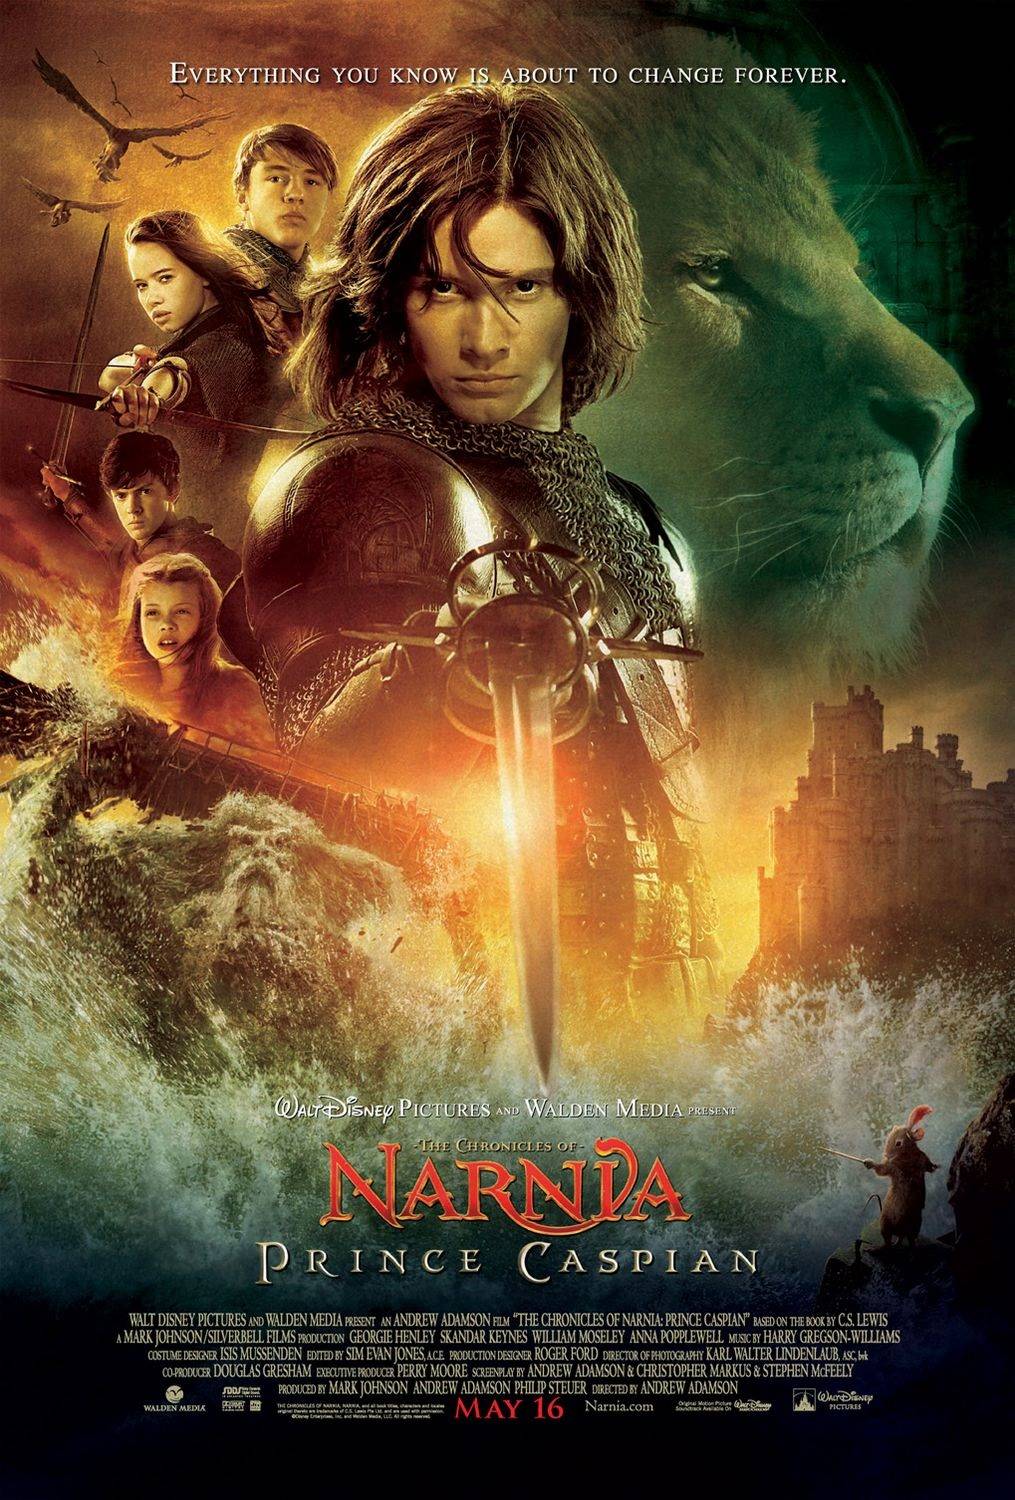 DOWNLOAD The Chronicles of Narnia: Prince Caspian (2008)